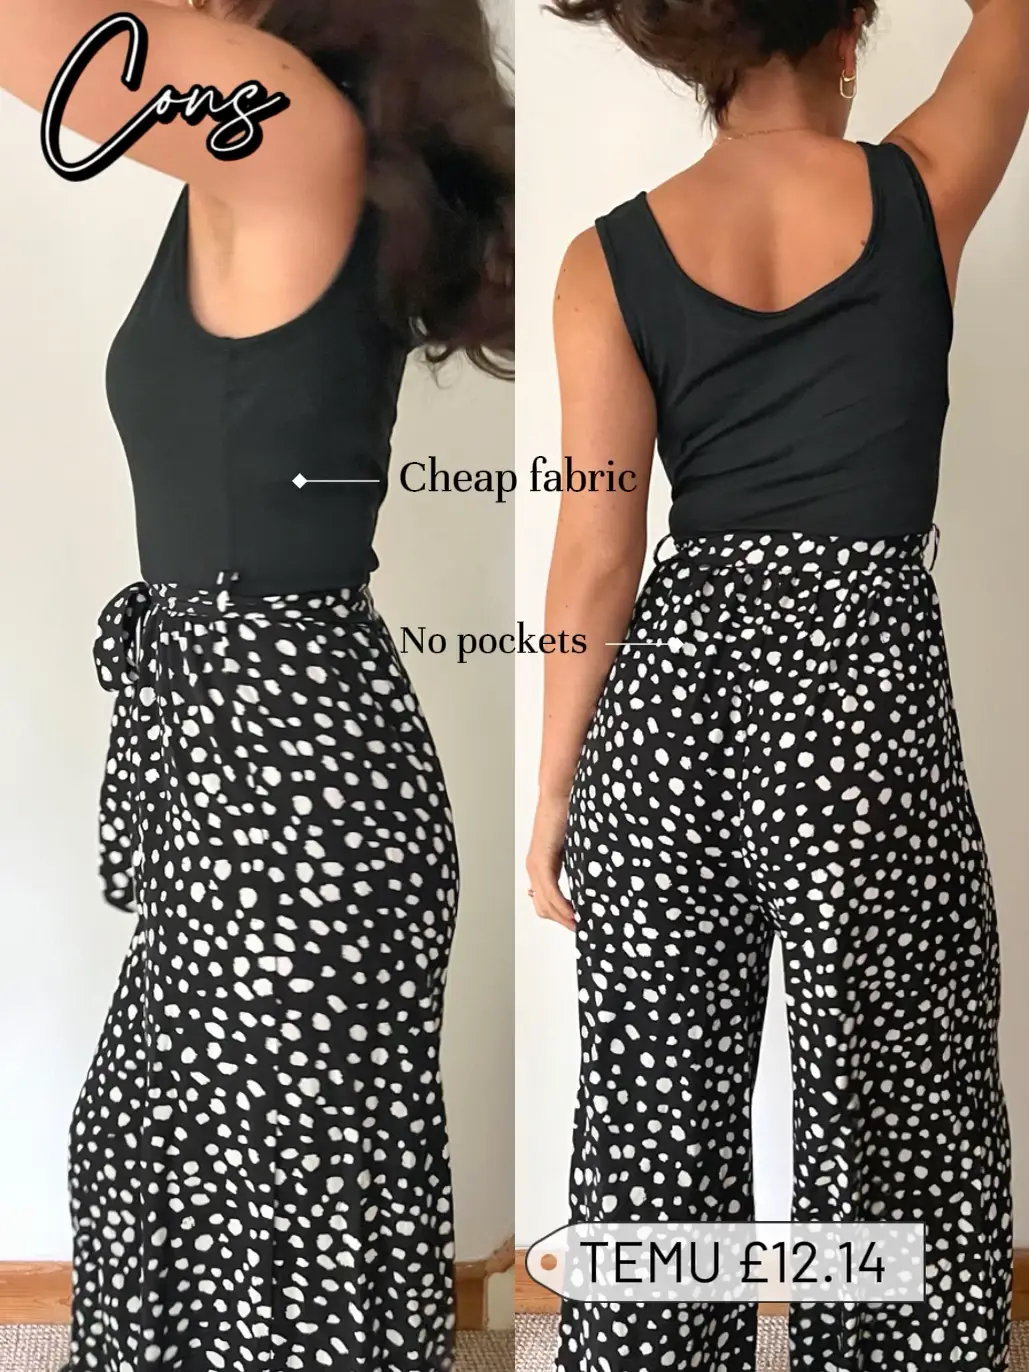 TEMU Polka Dot Jumpsuit Review✍🏻, Gallery posted by JuliaSH